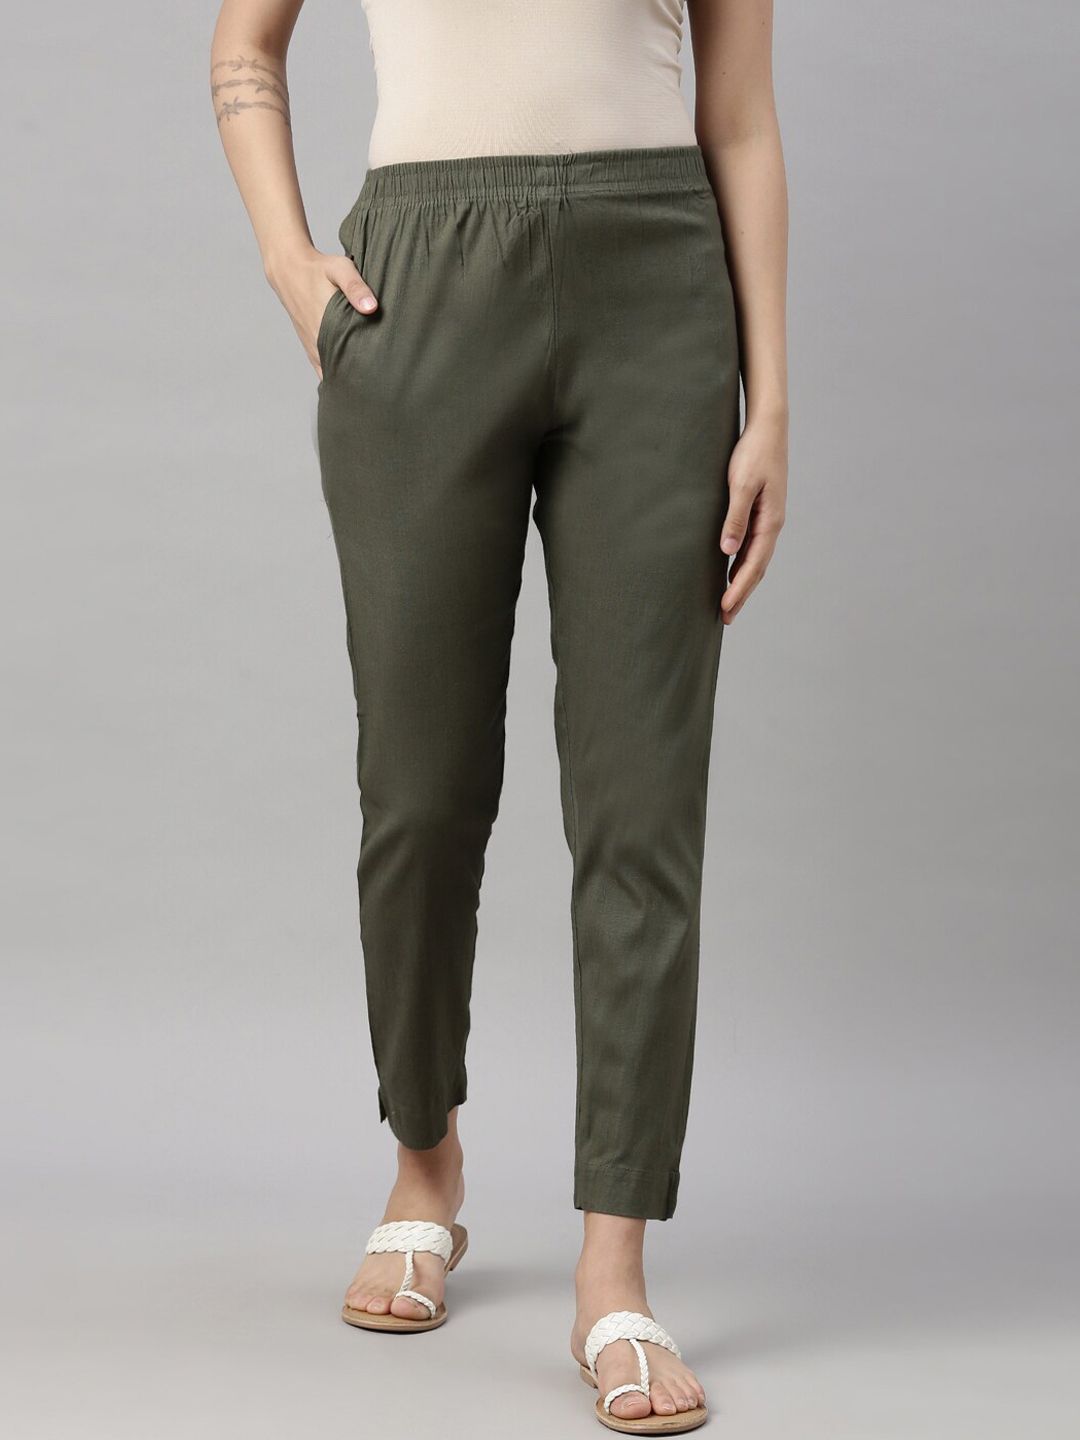 GOLDSTROMS Women Olive Green Trousers Price in India